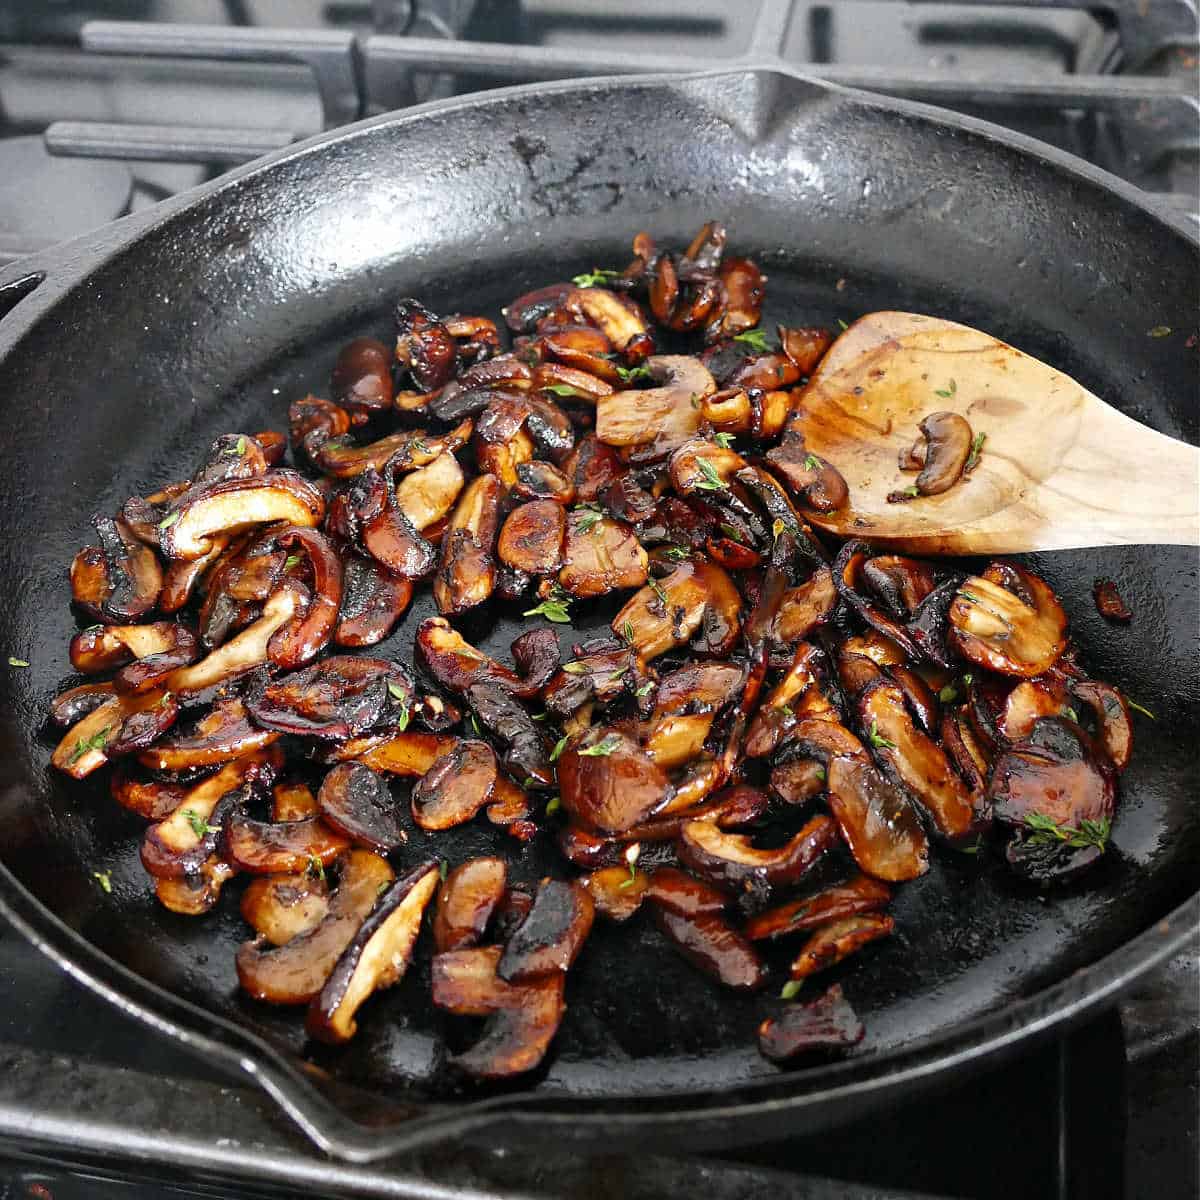 crispy mushrooms with maple syrup and balsamic vinegar